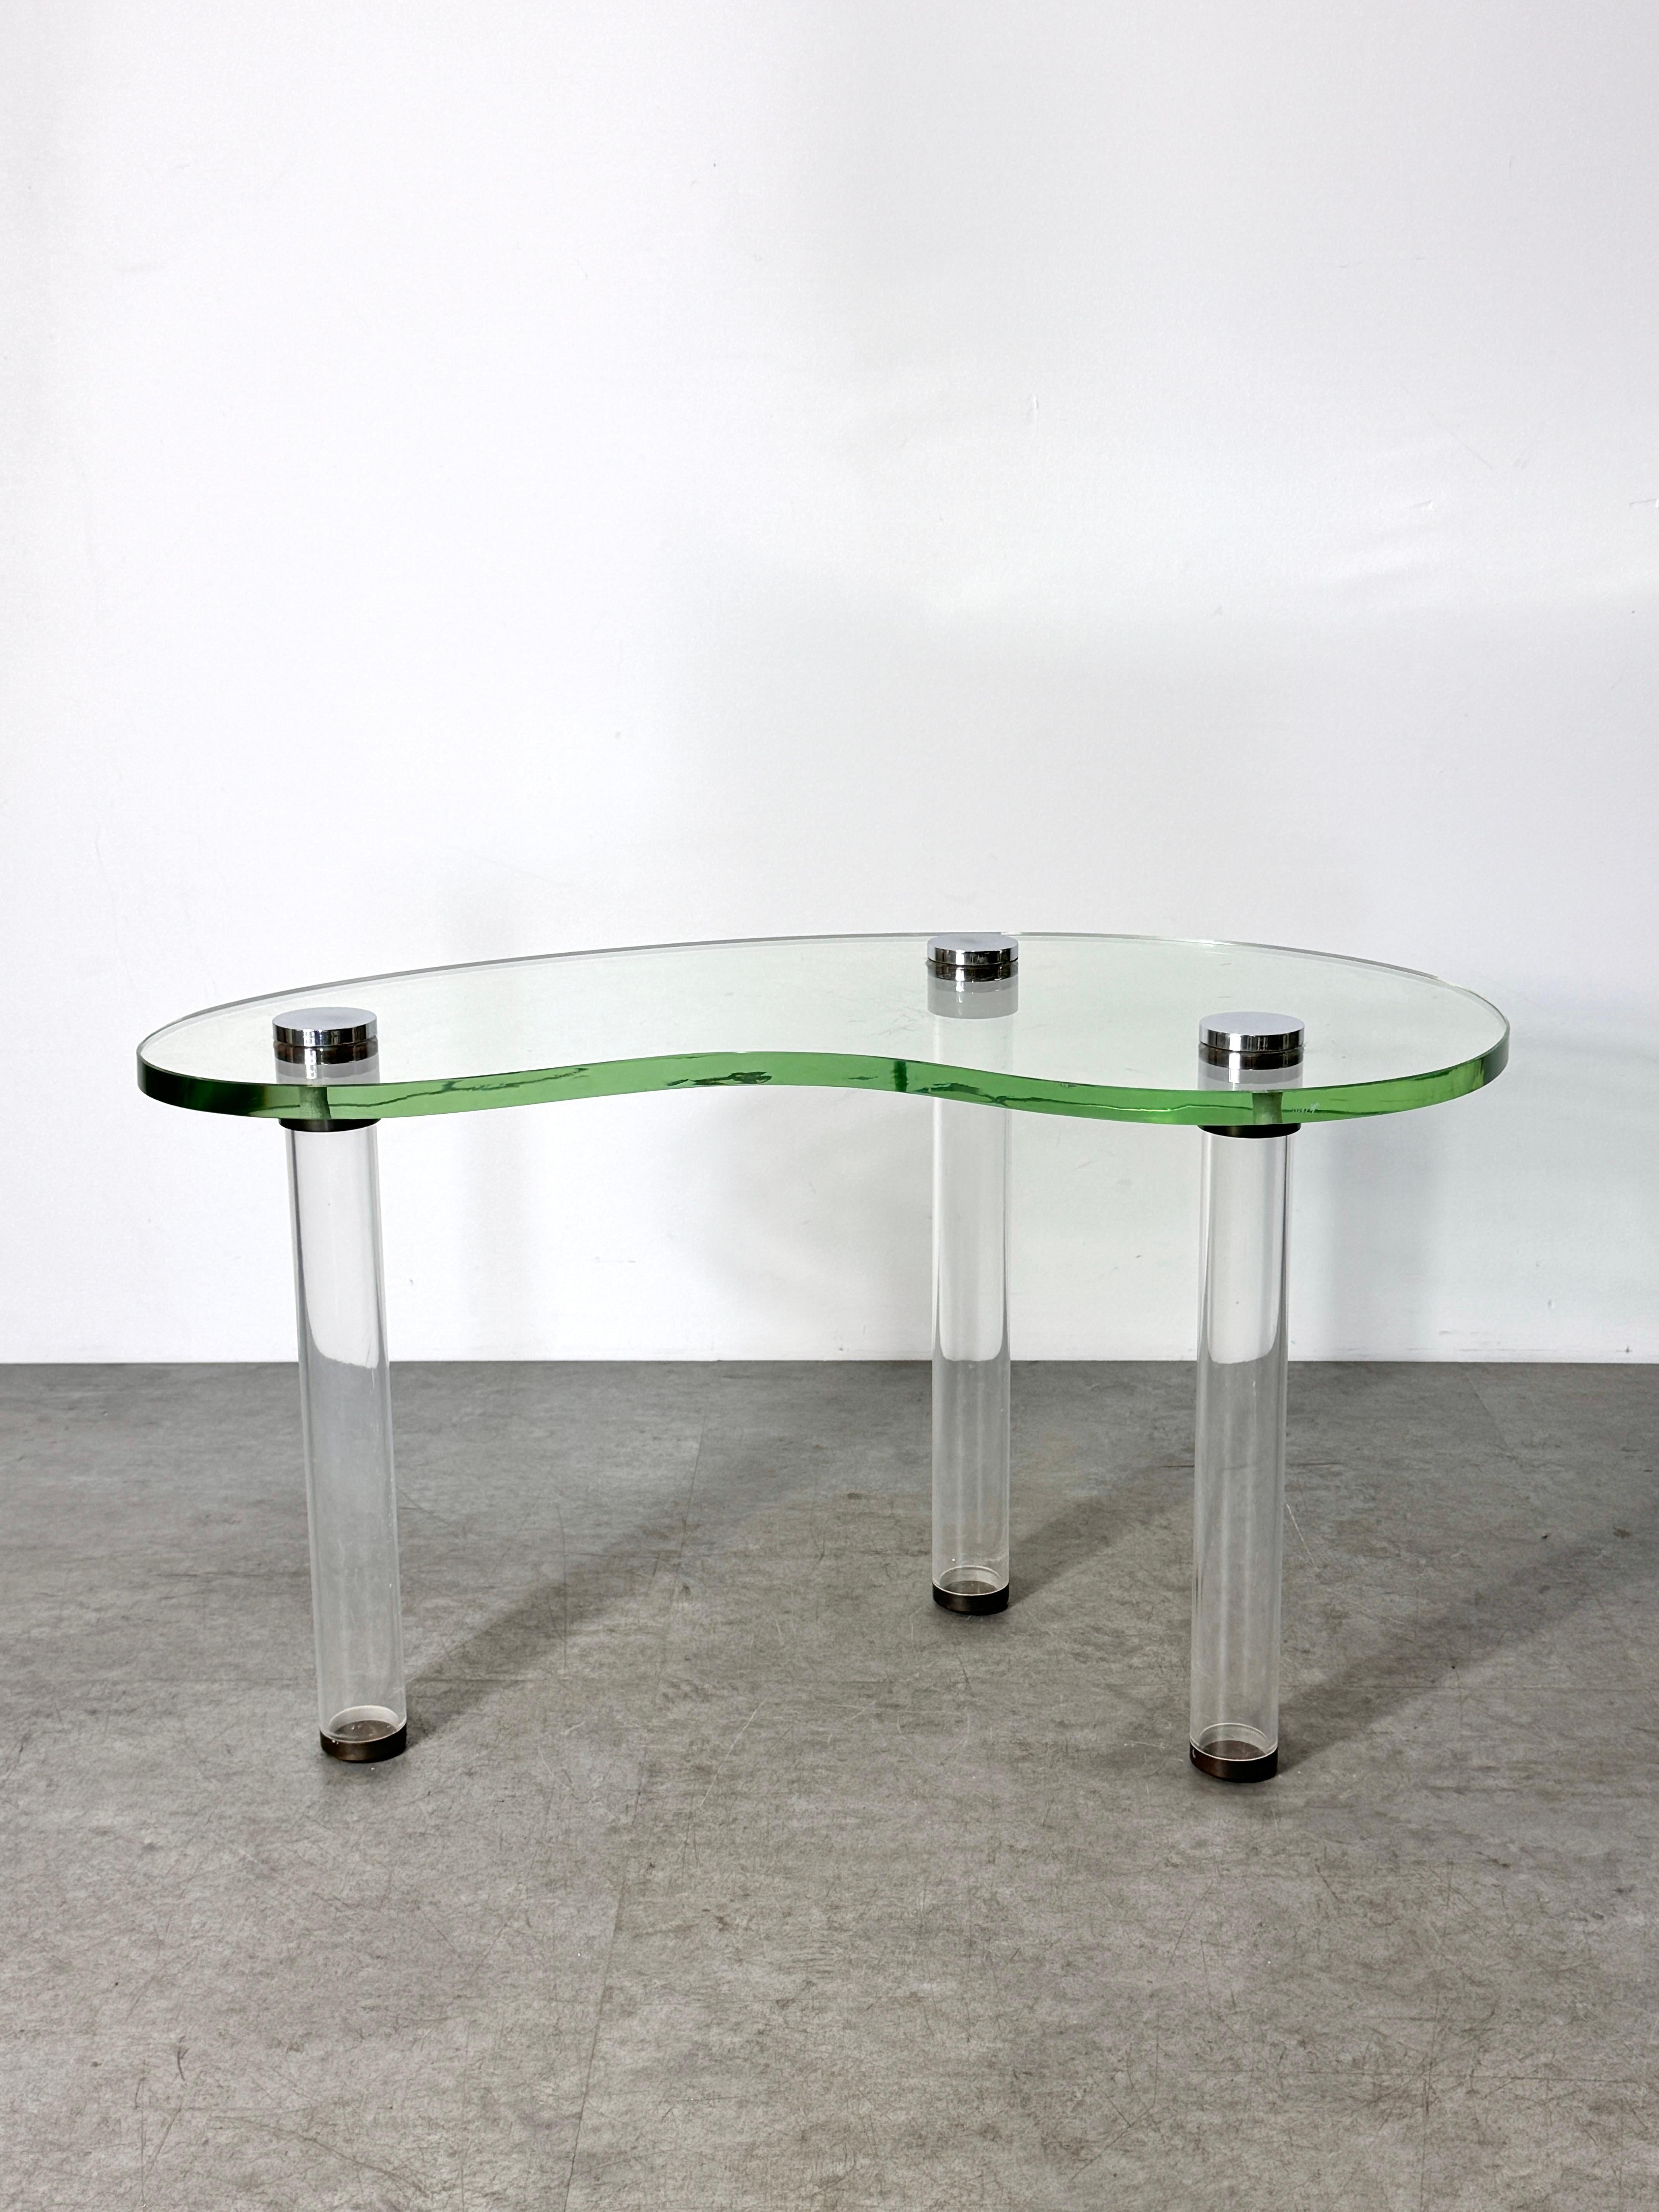 A rare cocktail table from the Herman Miller Luxury Group
Designed by Gilbert Rohde circa 1939-40

Kidney shaped glass surface supported by tubular Lucite legs with chrome plated steel fittings

30 inch width
17.5 inch depth
17 inch height